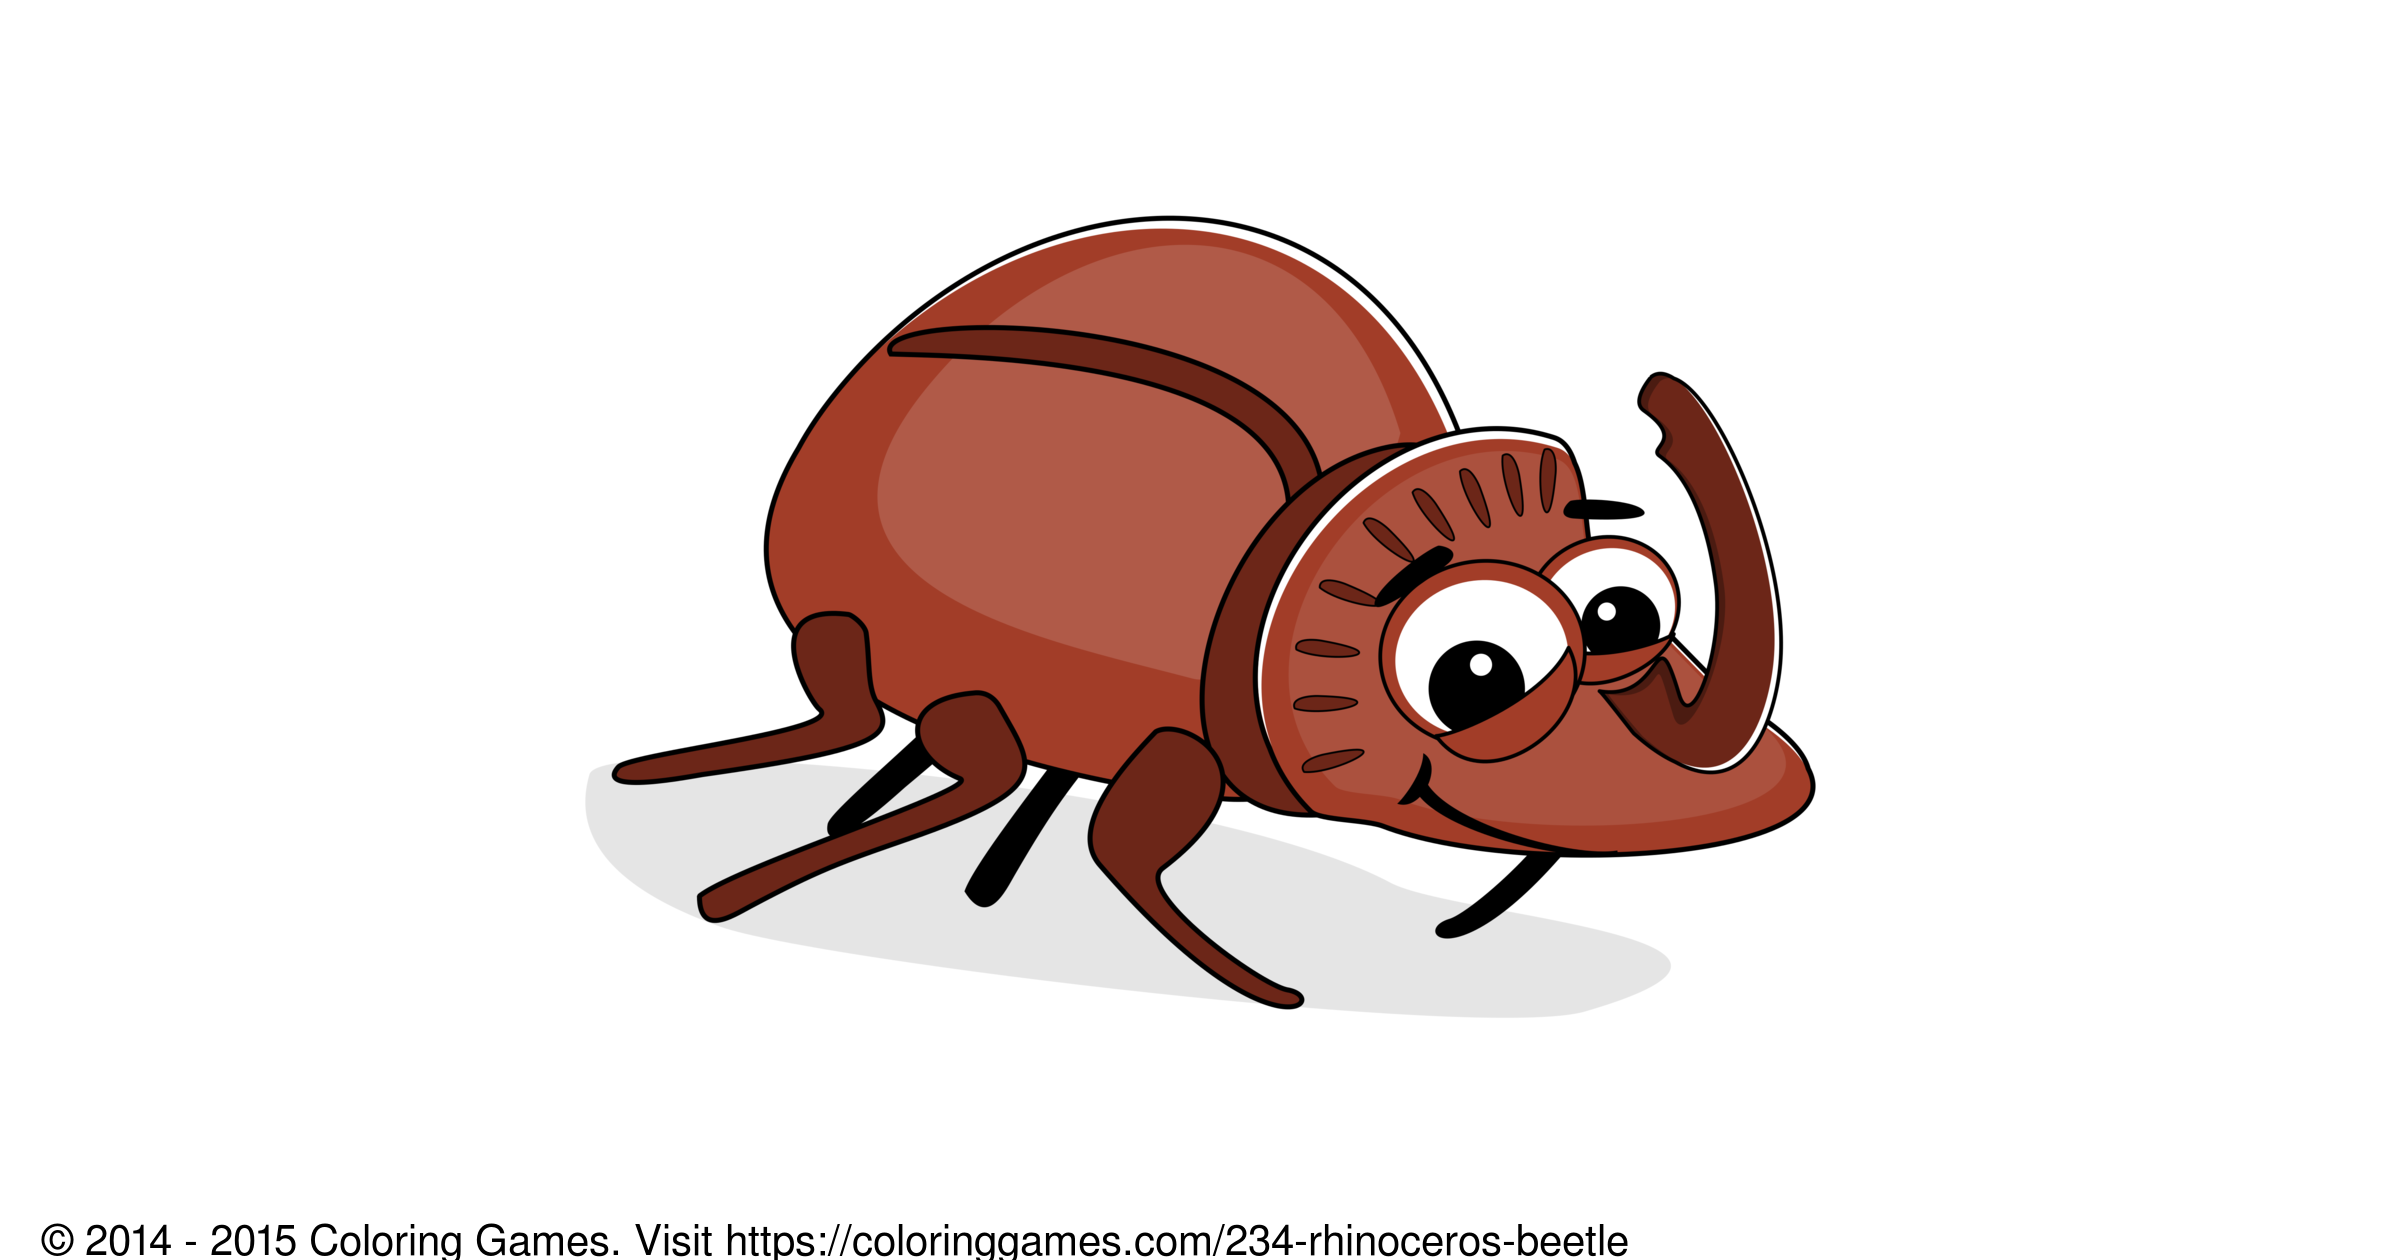 Download Rhinoceros Beetle - Coloring Games and Coloring Pages